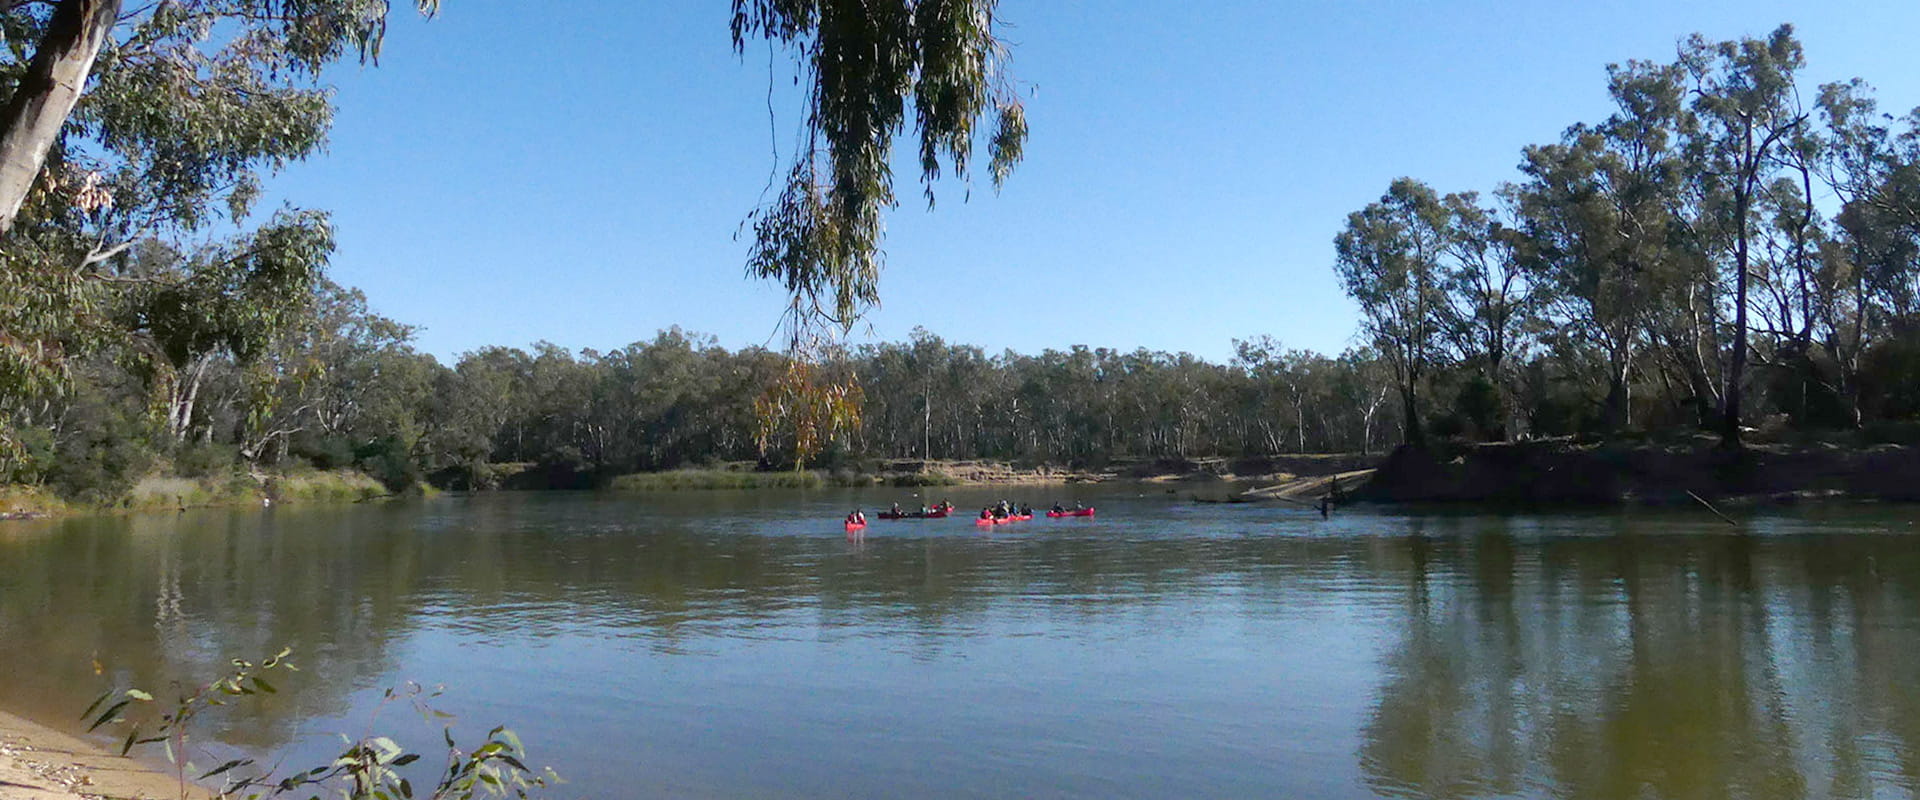 A group of people in red Kayaks gather in the centre of a lake surrounded by rugged bushland.